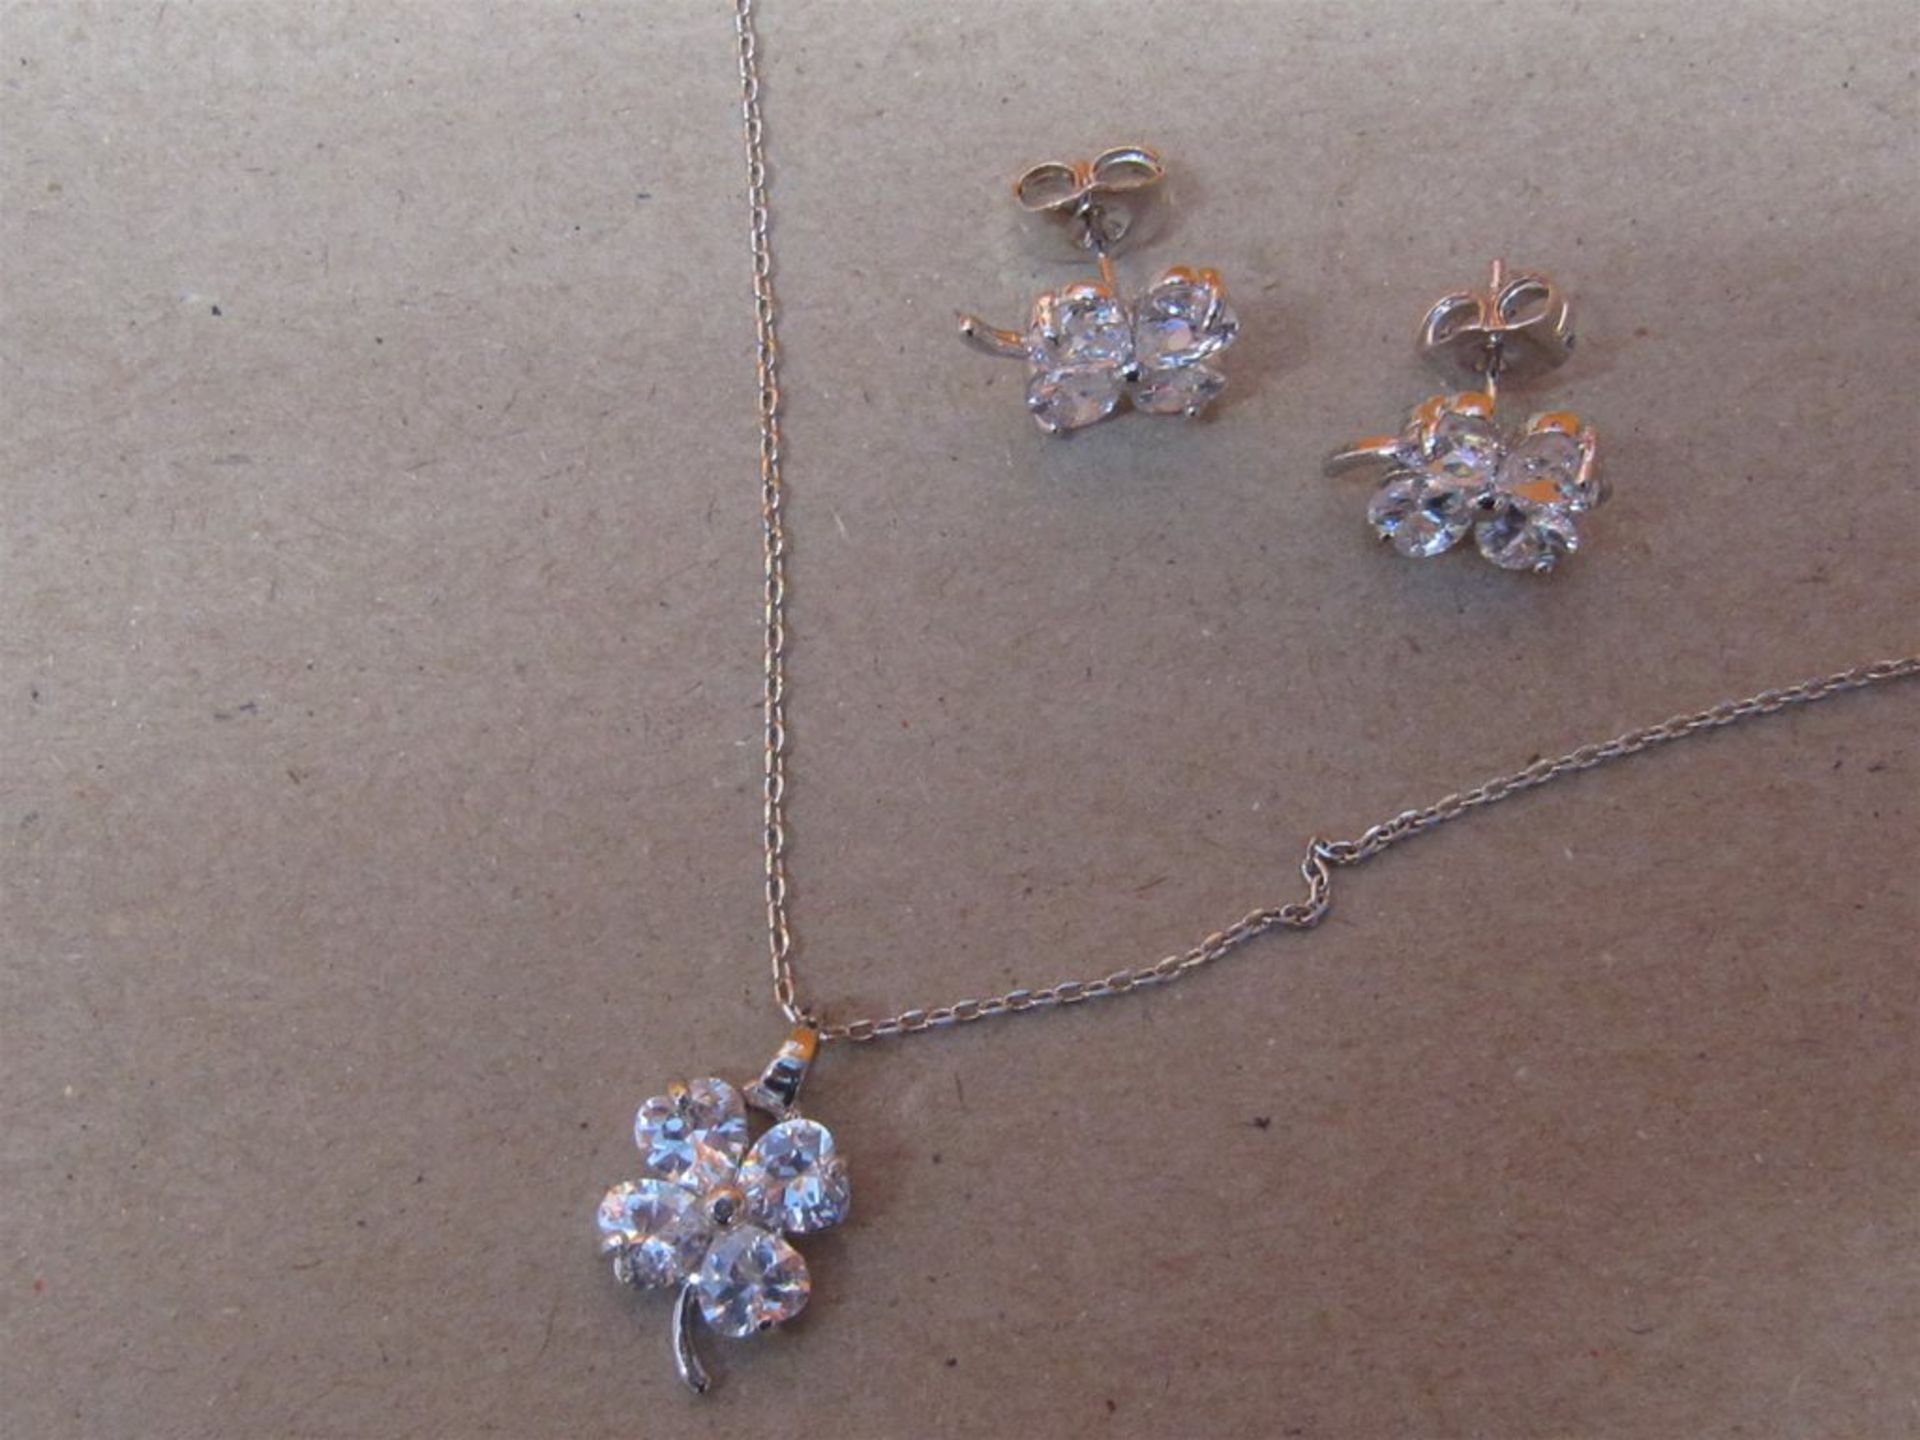 Necklace & Earring Set with Swarovski Elements. Free Shipping when you Win 2 Lots or more. - Image 3 of 7